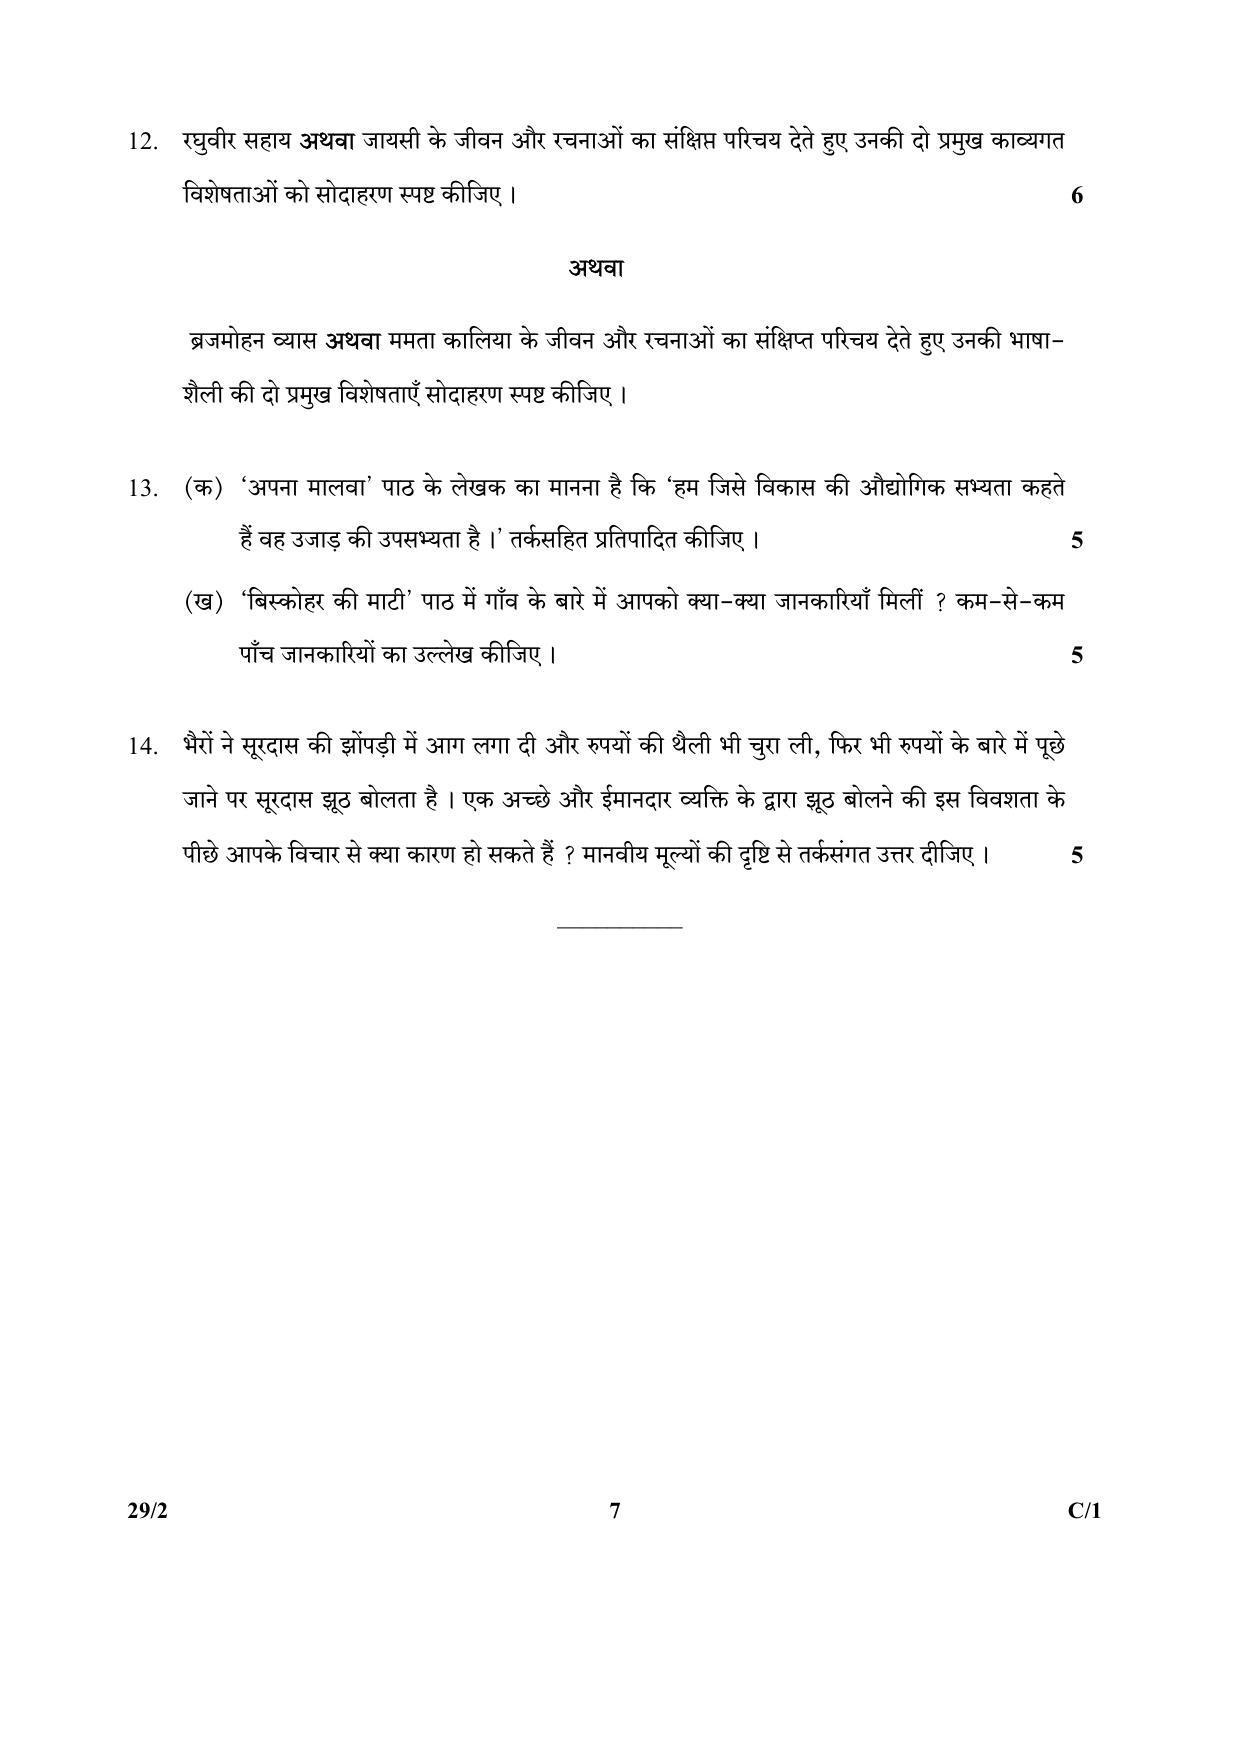 CBSE Class 12 29-2 (Hindi Elective) 2018 Compartment Question Paper - Page 7